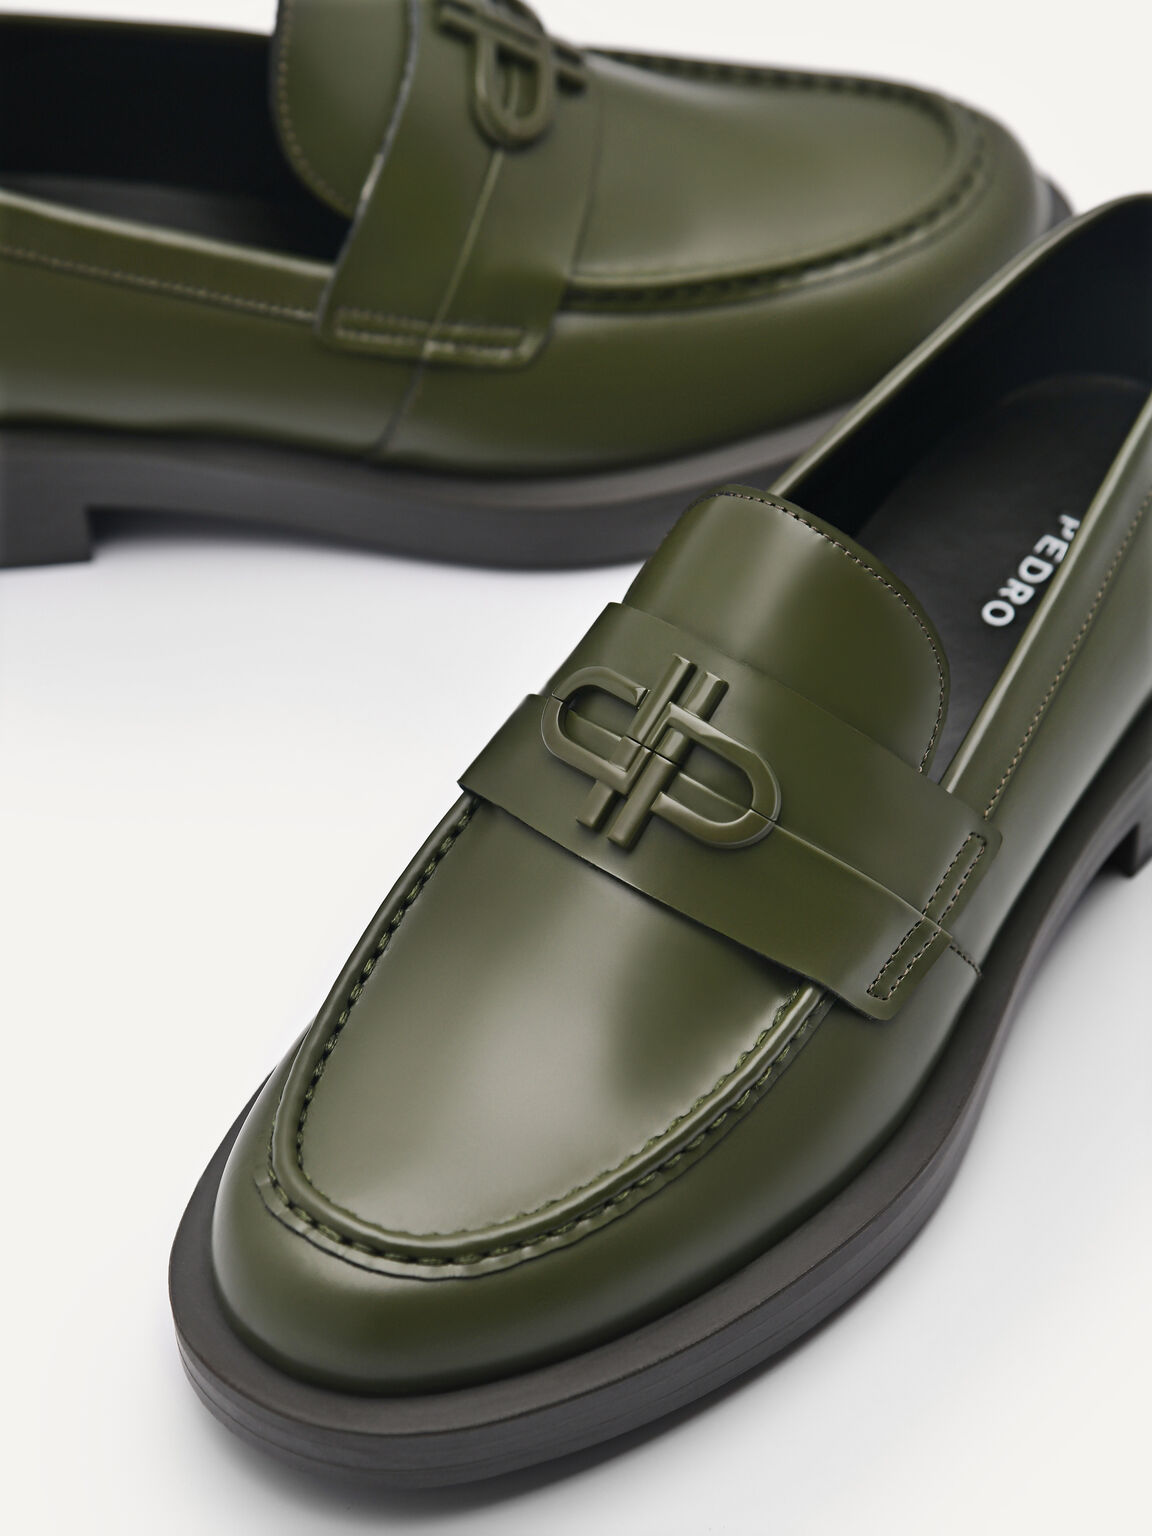 PEDRO Icon Leather Loafers, Military Green, hi-res